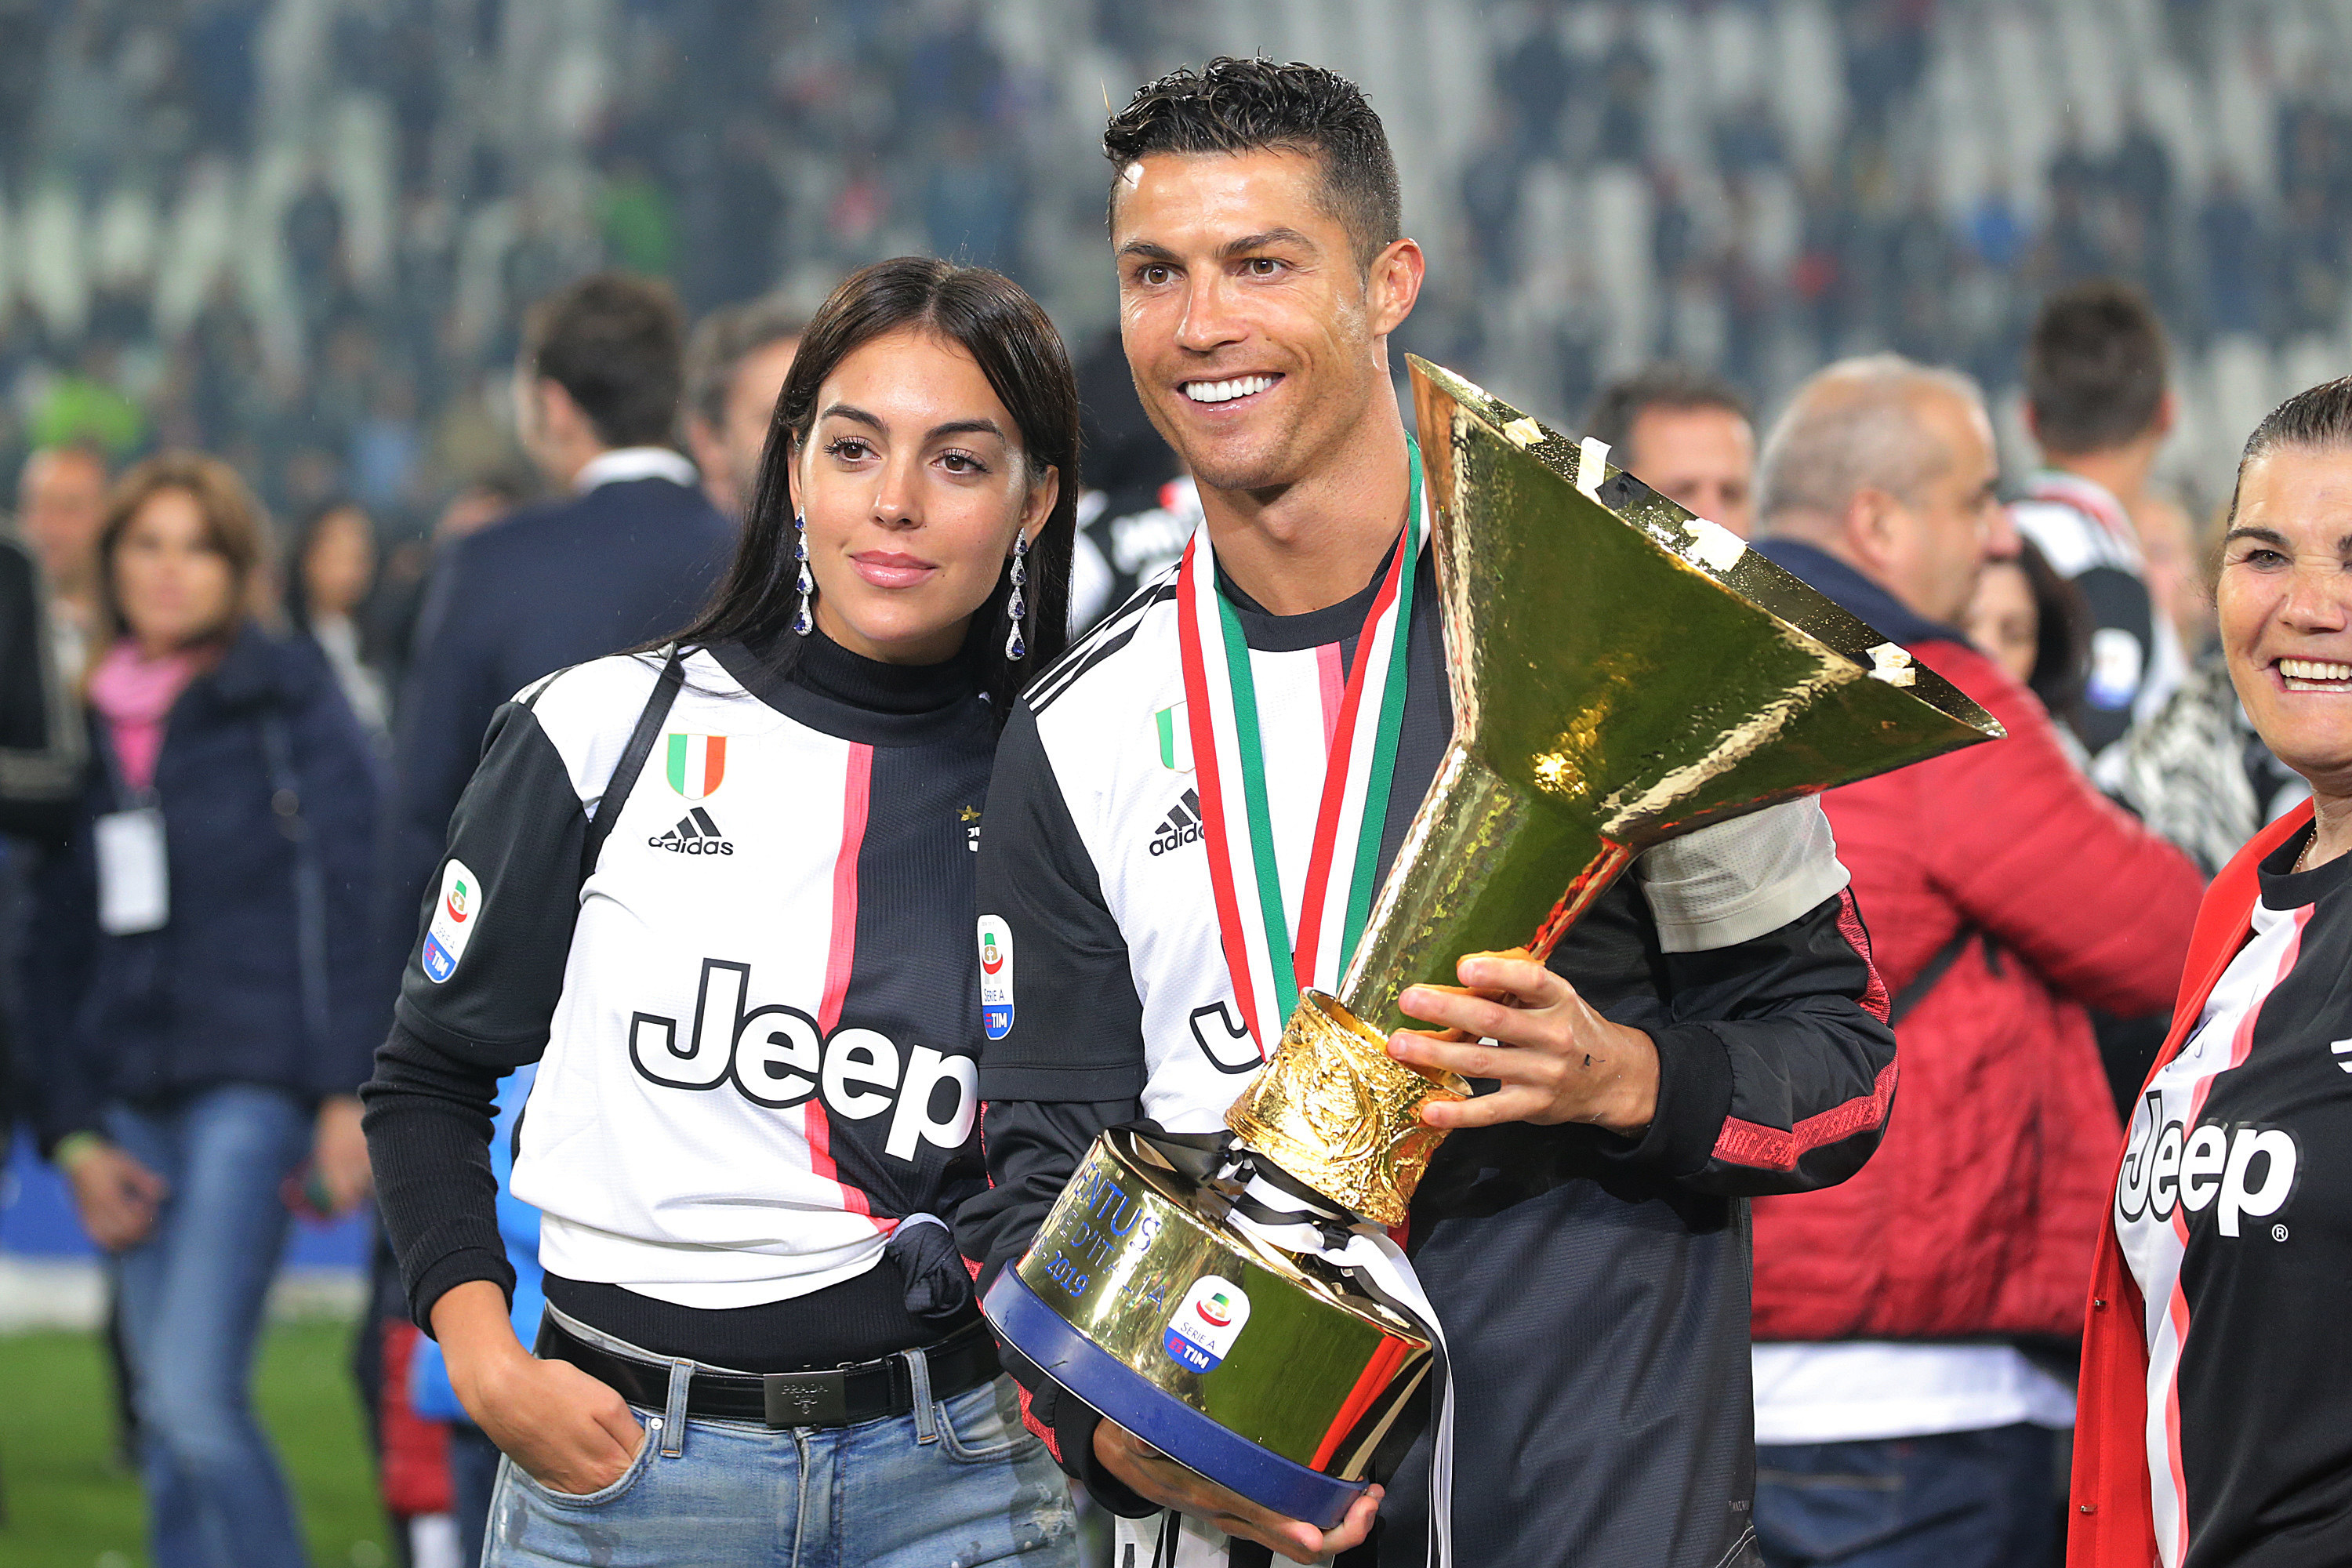 Georgina and Cristiano smiling on a soccer field while he holds a large trophy